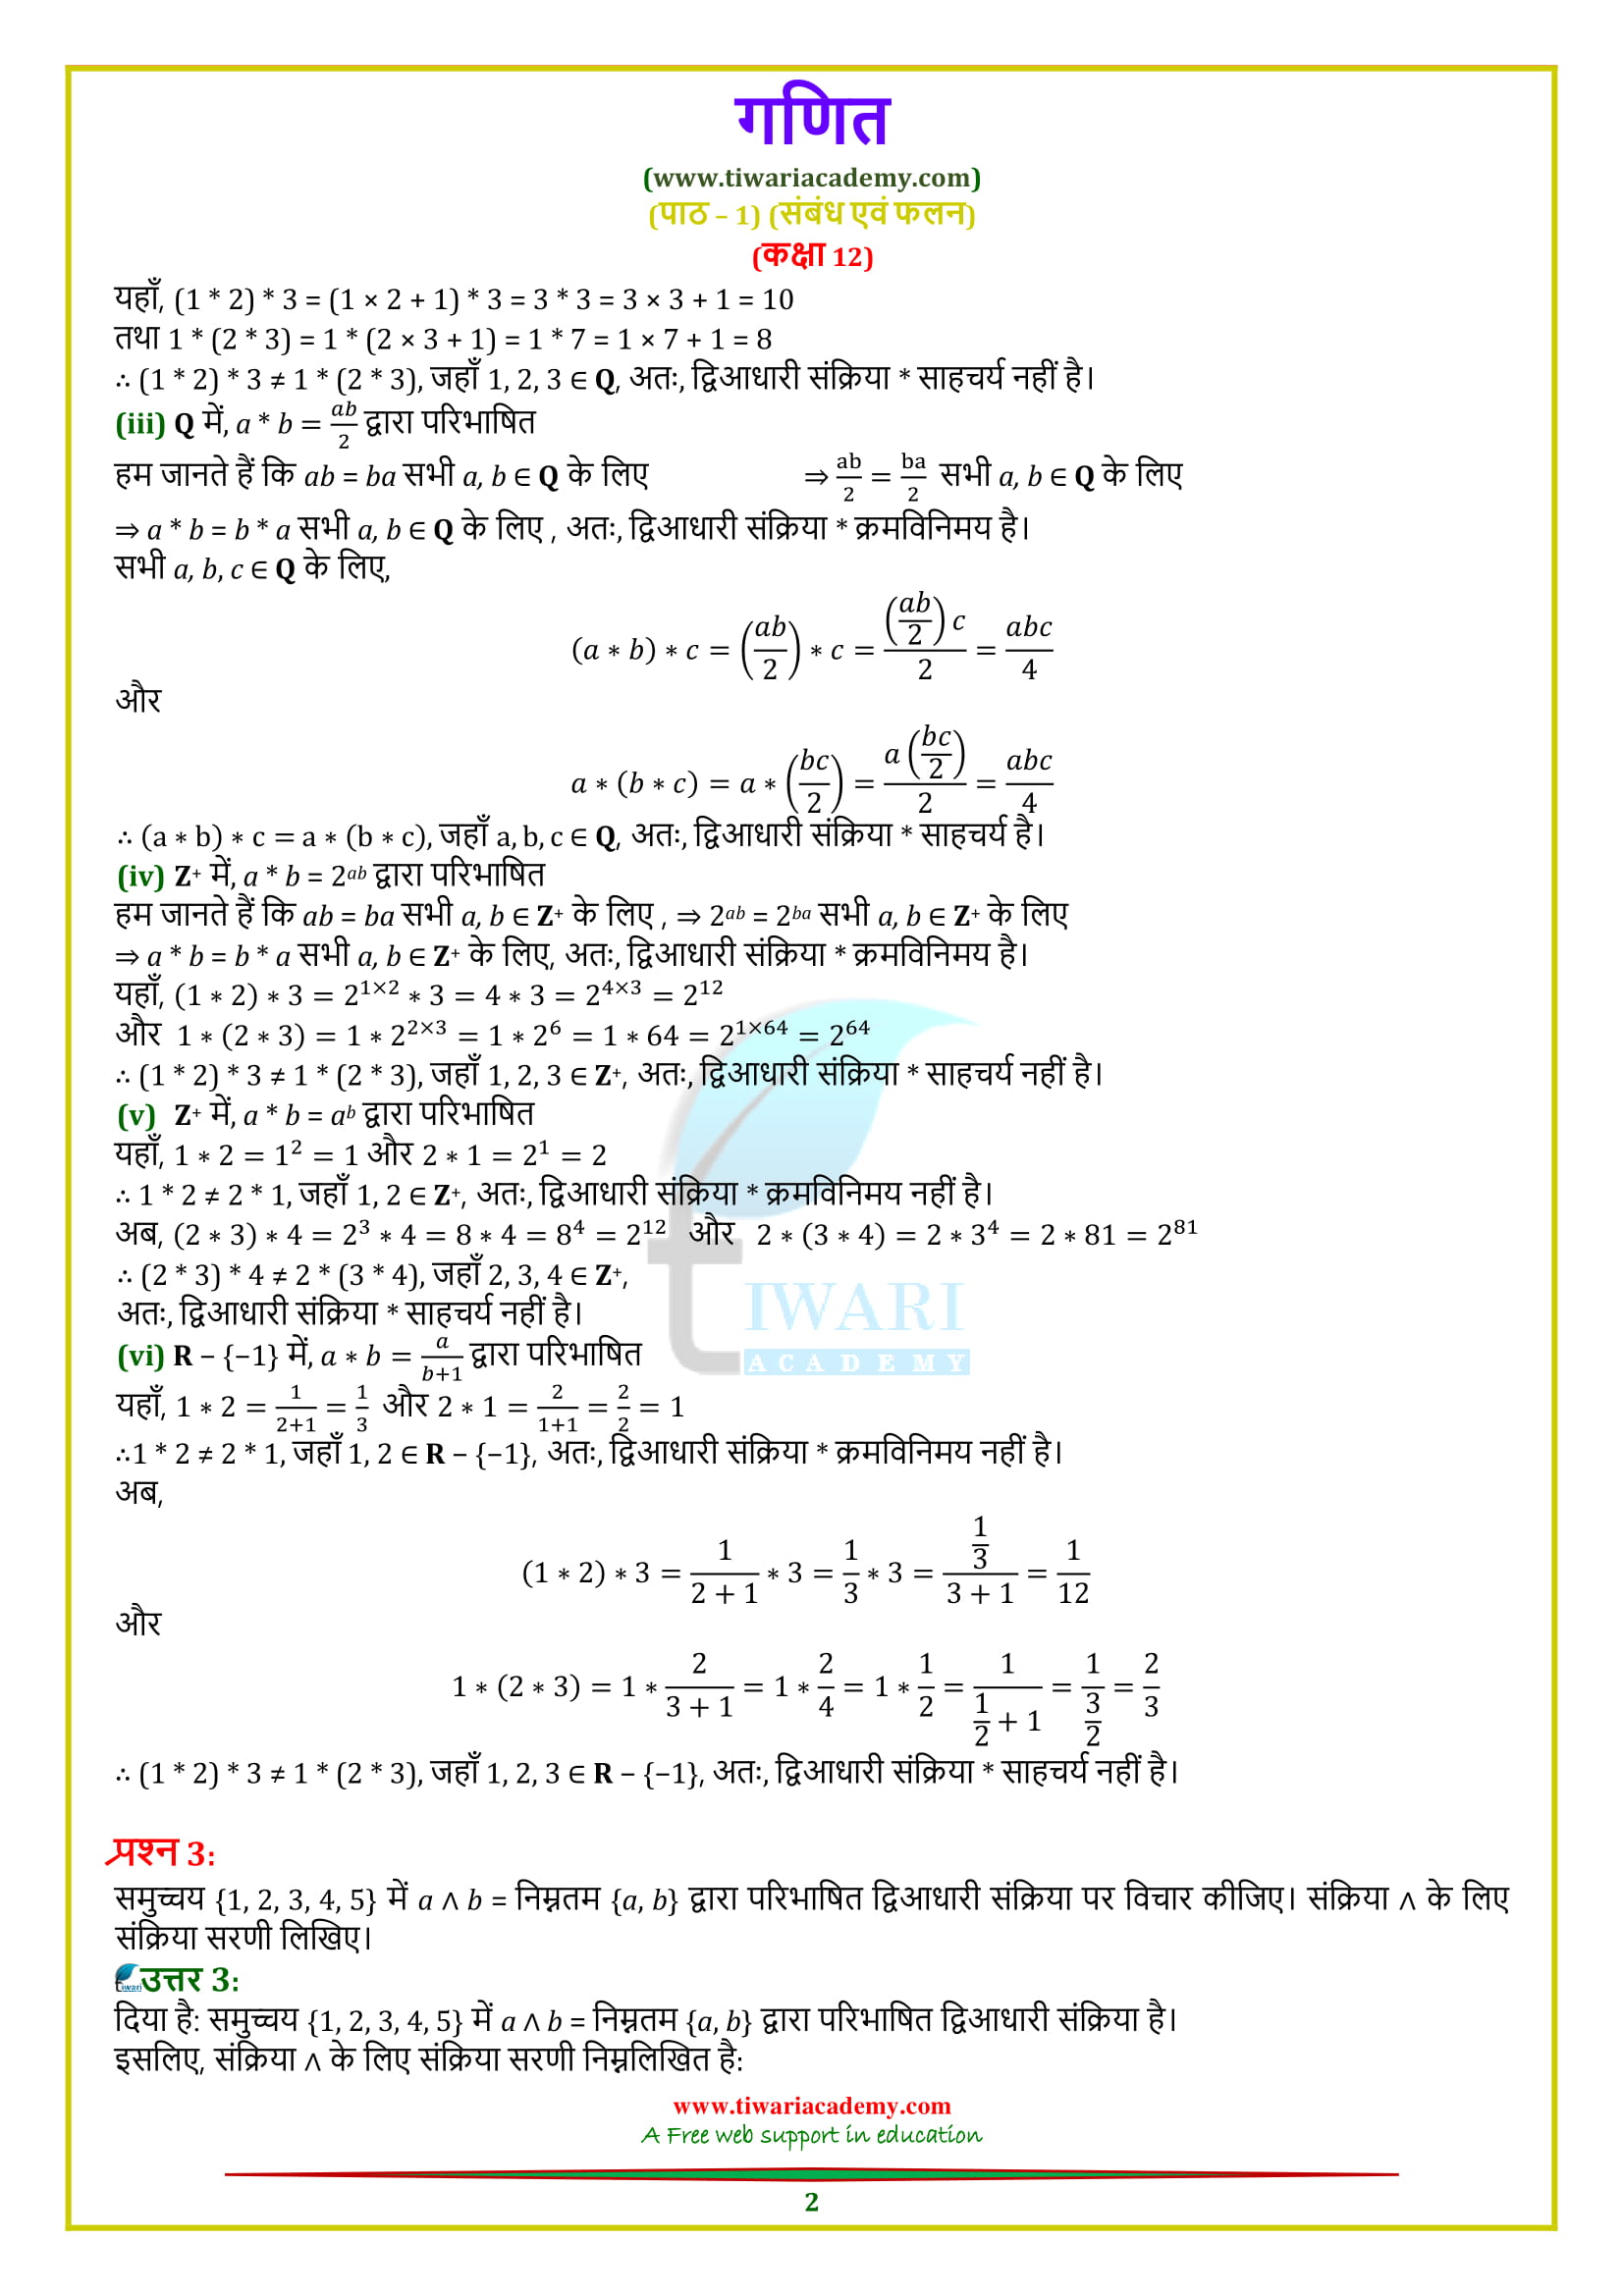 12 Maths Chapter 1 Exercise 1.4 solutions in Hindi for intermediate up board.